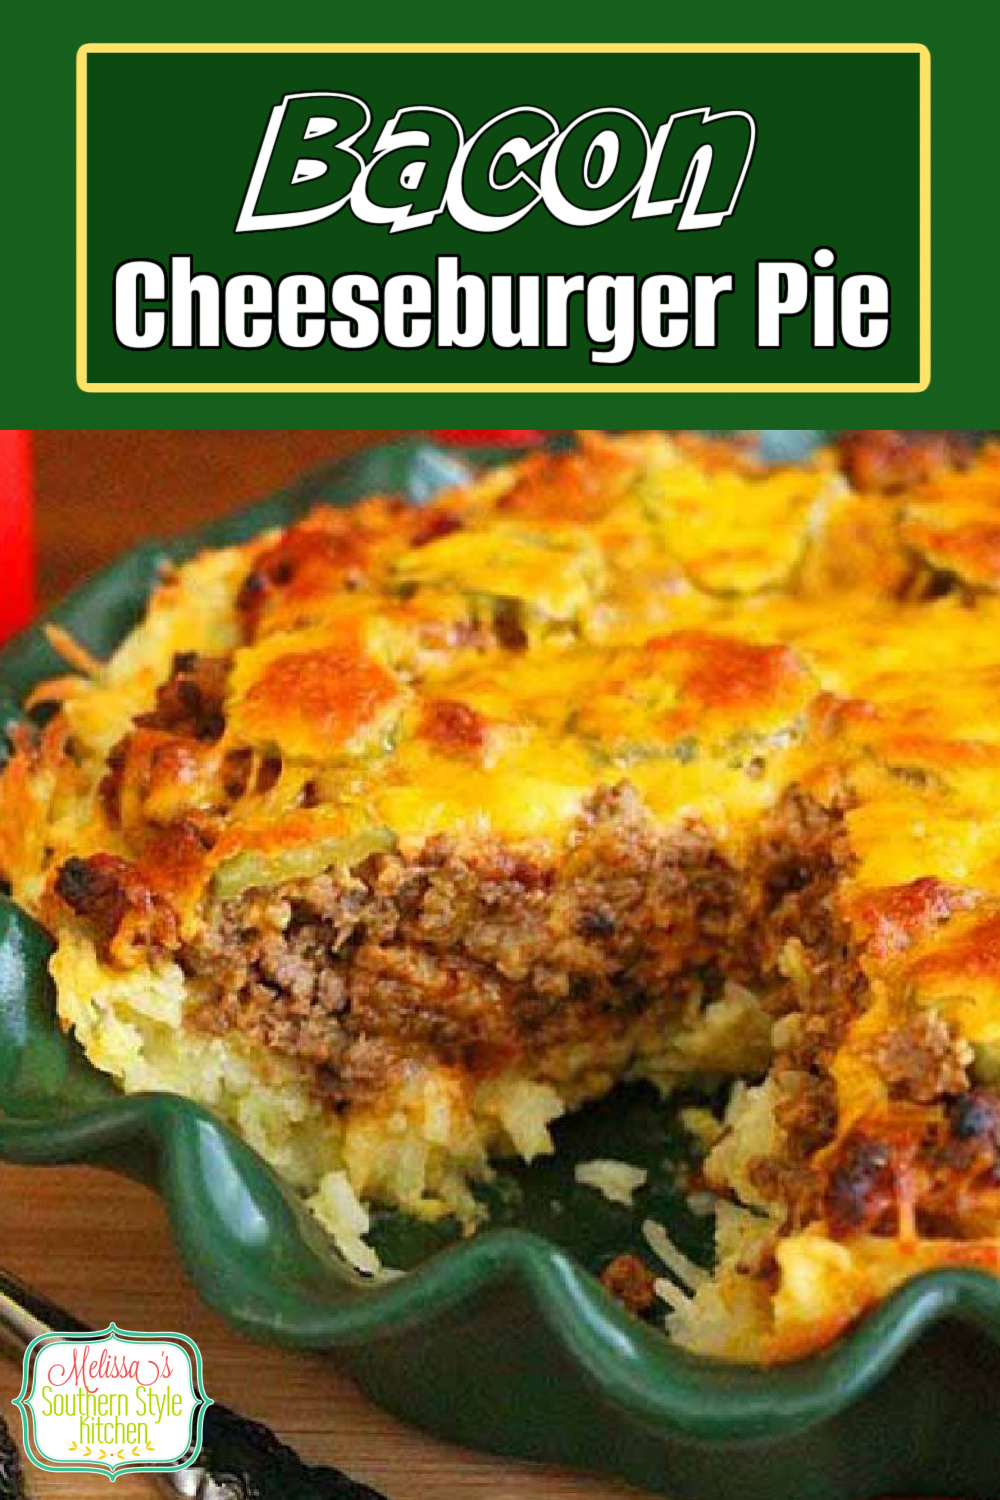 This mouthwatering Bacon Cheeseburger Pie is a riff on classic cheeseburgers that's budget friendly and simple to make #cheeseburgers #bacon #baconcheeseburgers #cheeseburgerpie #cheeseburgerrecipes #beef #easygroundbeefrecipes #hashbrowns #savorypies #easydinnerrecipes #groundbeefrecipes #southernstyle